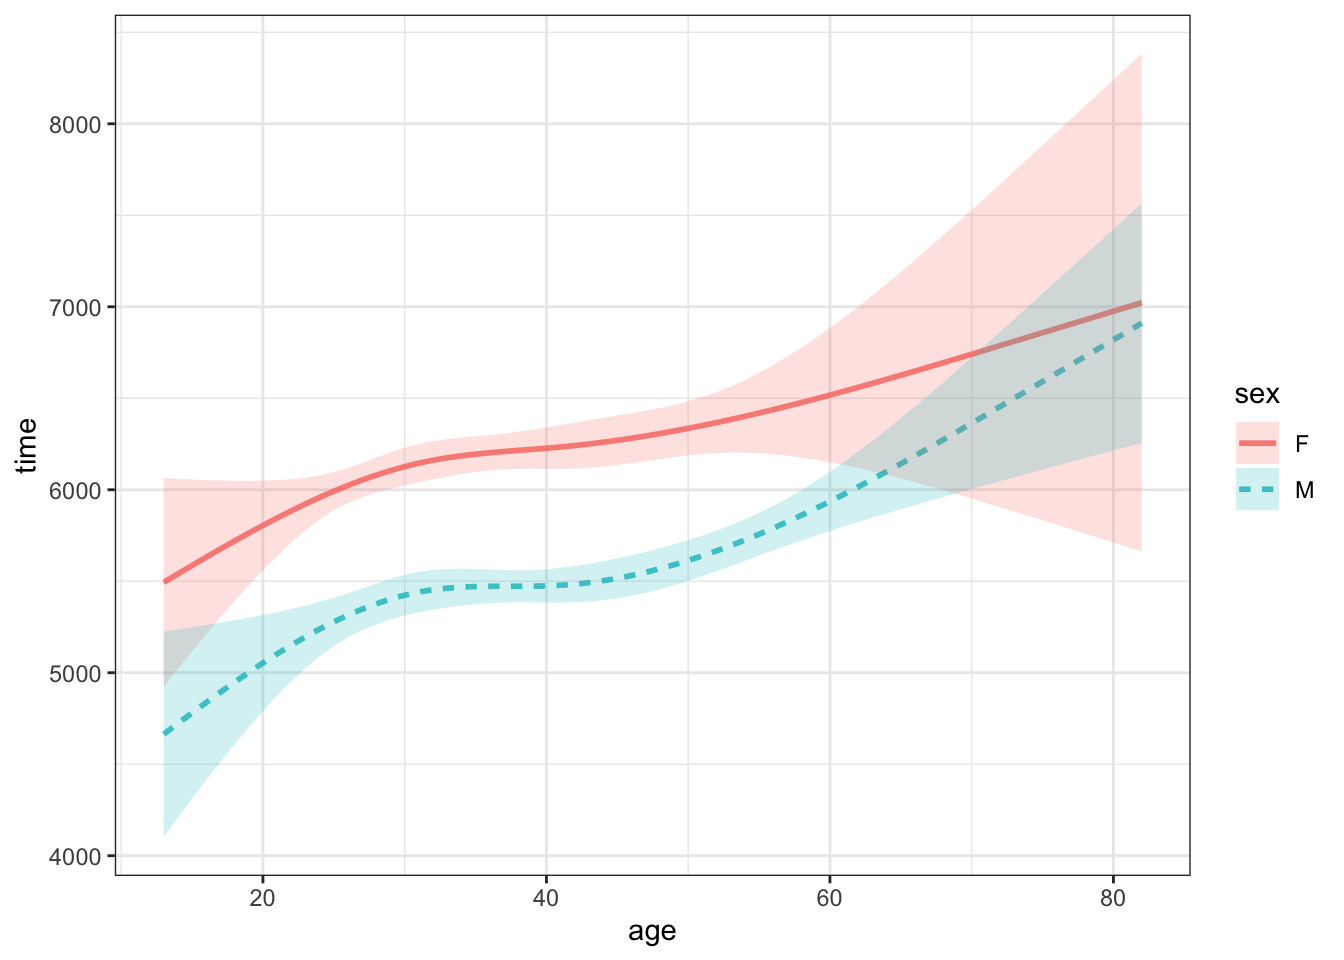 Confidence bands showings sampling variation in a function time ~ age + sex trained on a sample of n = 1600 from the ten-mile race data.